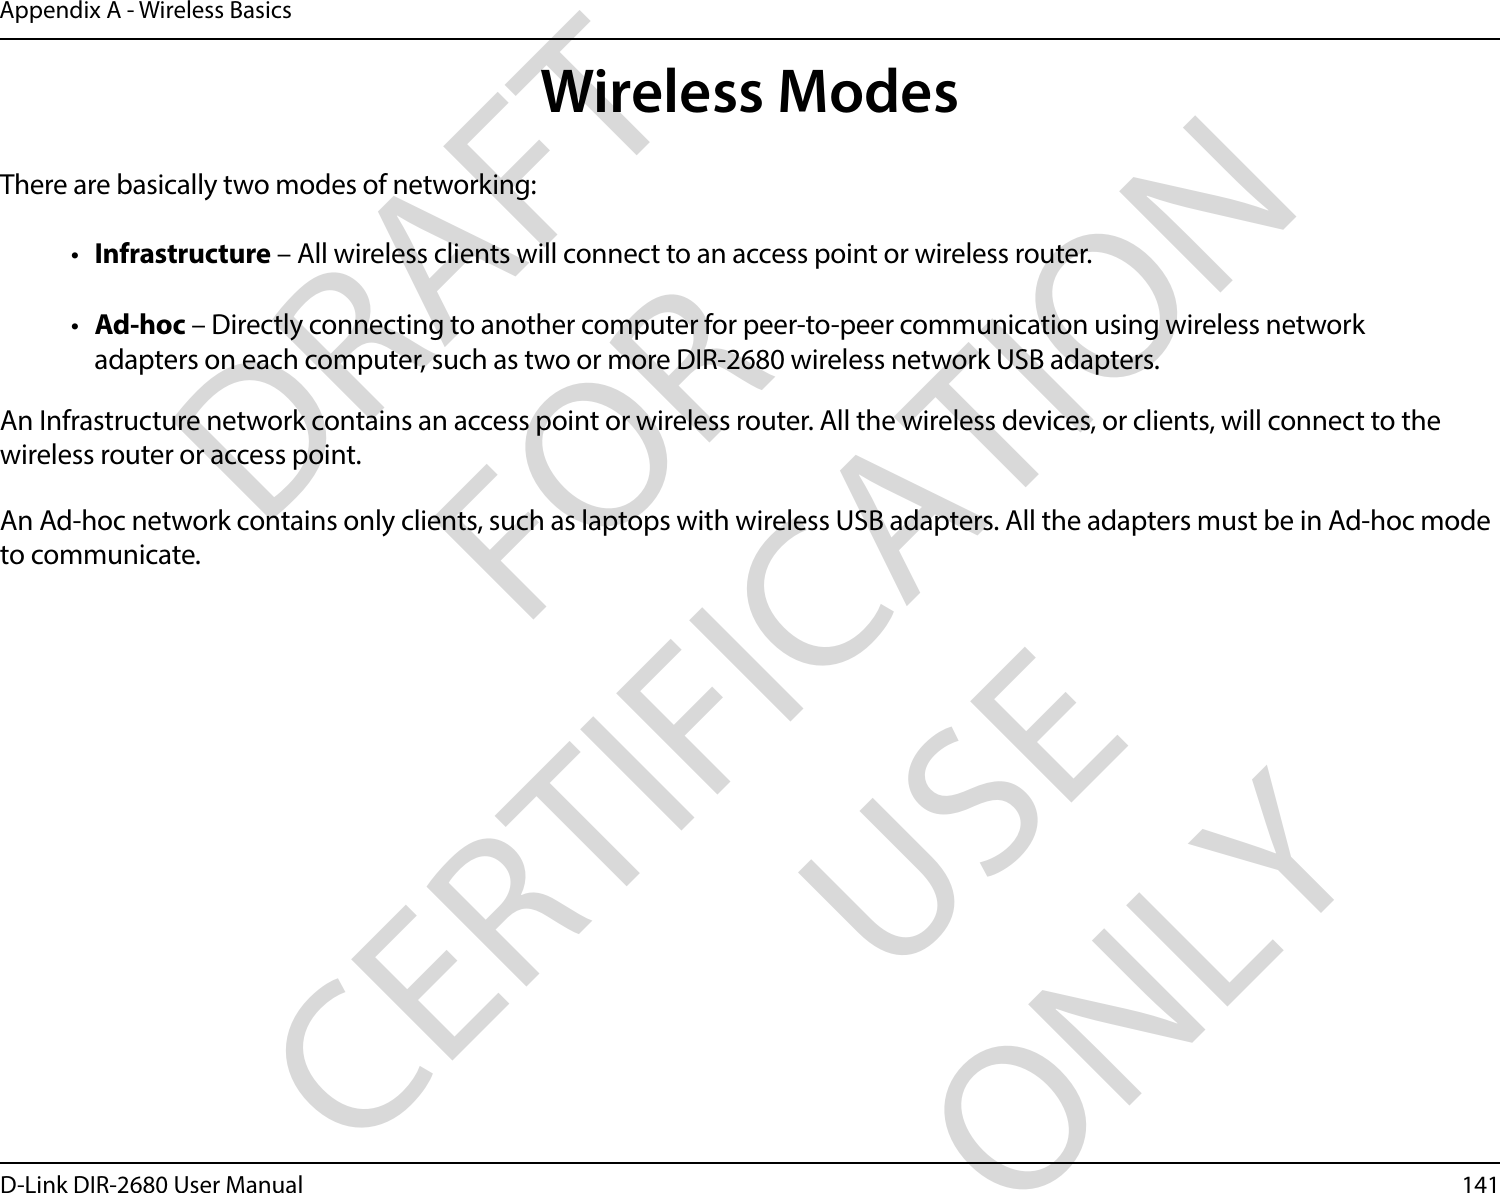 141D-Link DIR-2680 User ManualAppendix A - Wireless Basics     There are basically two modes of networking: •  Infrastructure – All wireless clients will connect to an access point or wireless router.•  Ad-hoc – Directly connecting to another computer for peer-to-peer communication using wireless network adapters on each computer, such as two or more DIR-2680 wireless network USB adapters.An Infrastructure network contains an access point or wireless router. All the wireless devices, or clients, will connect to the wireless router or access point. An Ad-hoc network contains only clients, such as laptops with wireless USB adapters. All the adapters must be in Ad-hoc mode to communicate.Wireless ModesDRAFT FOR CERTIFICATION USE ONLY